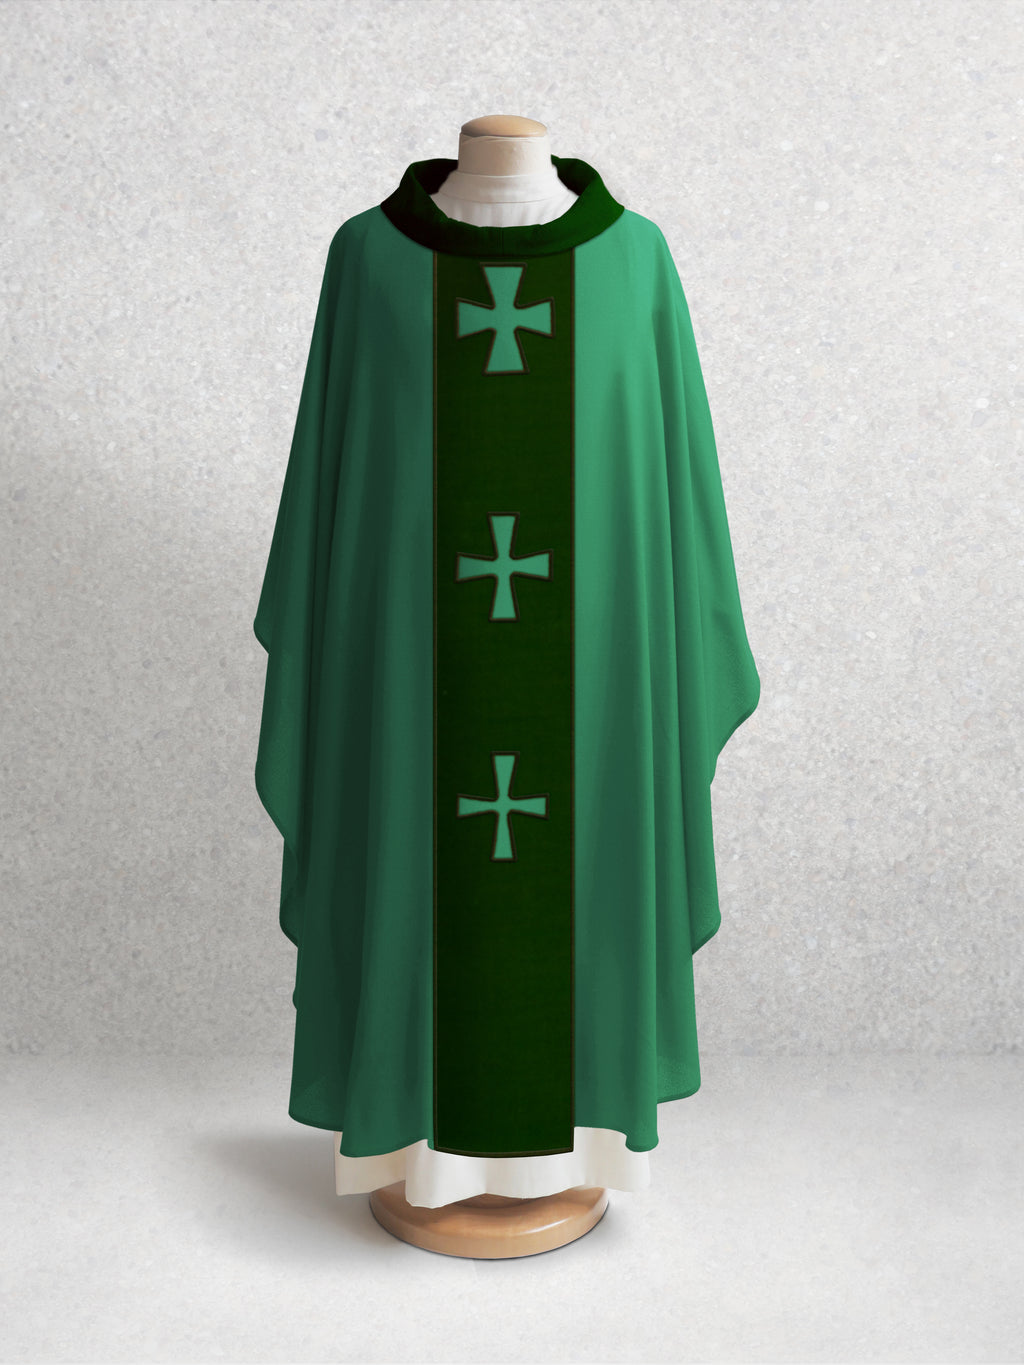 376 Crucifixion Chasuble in Green